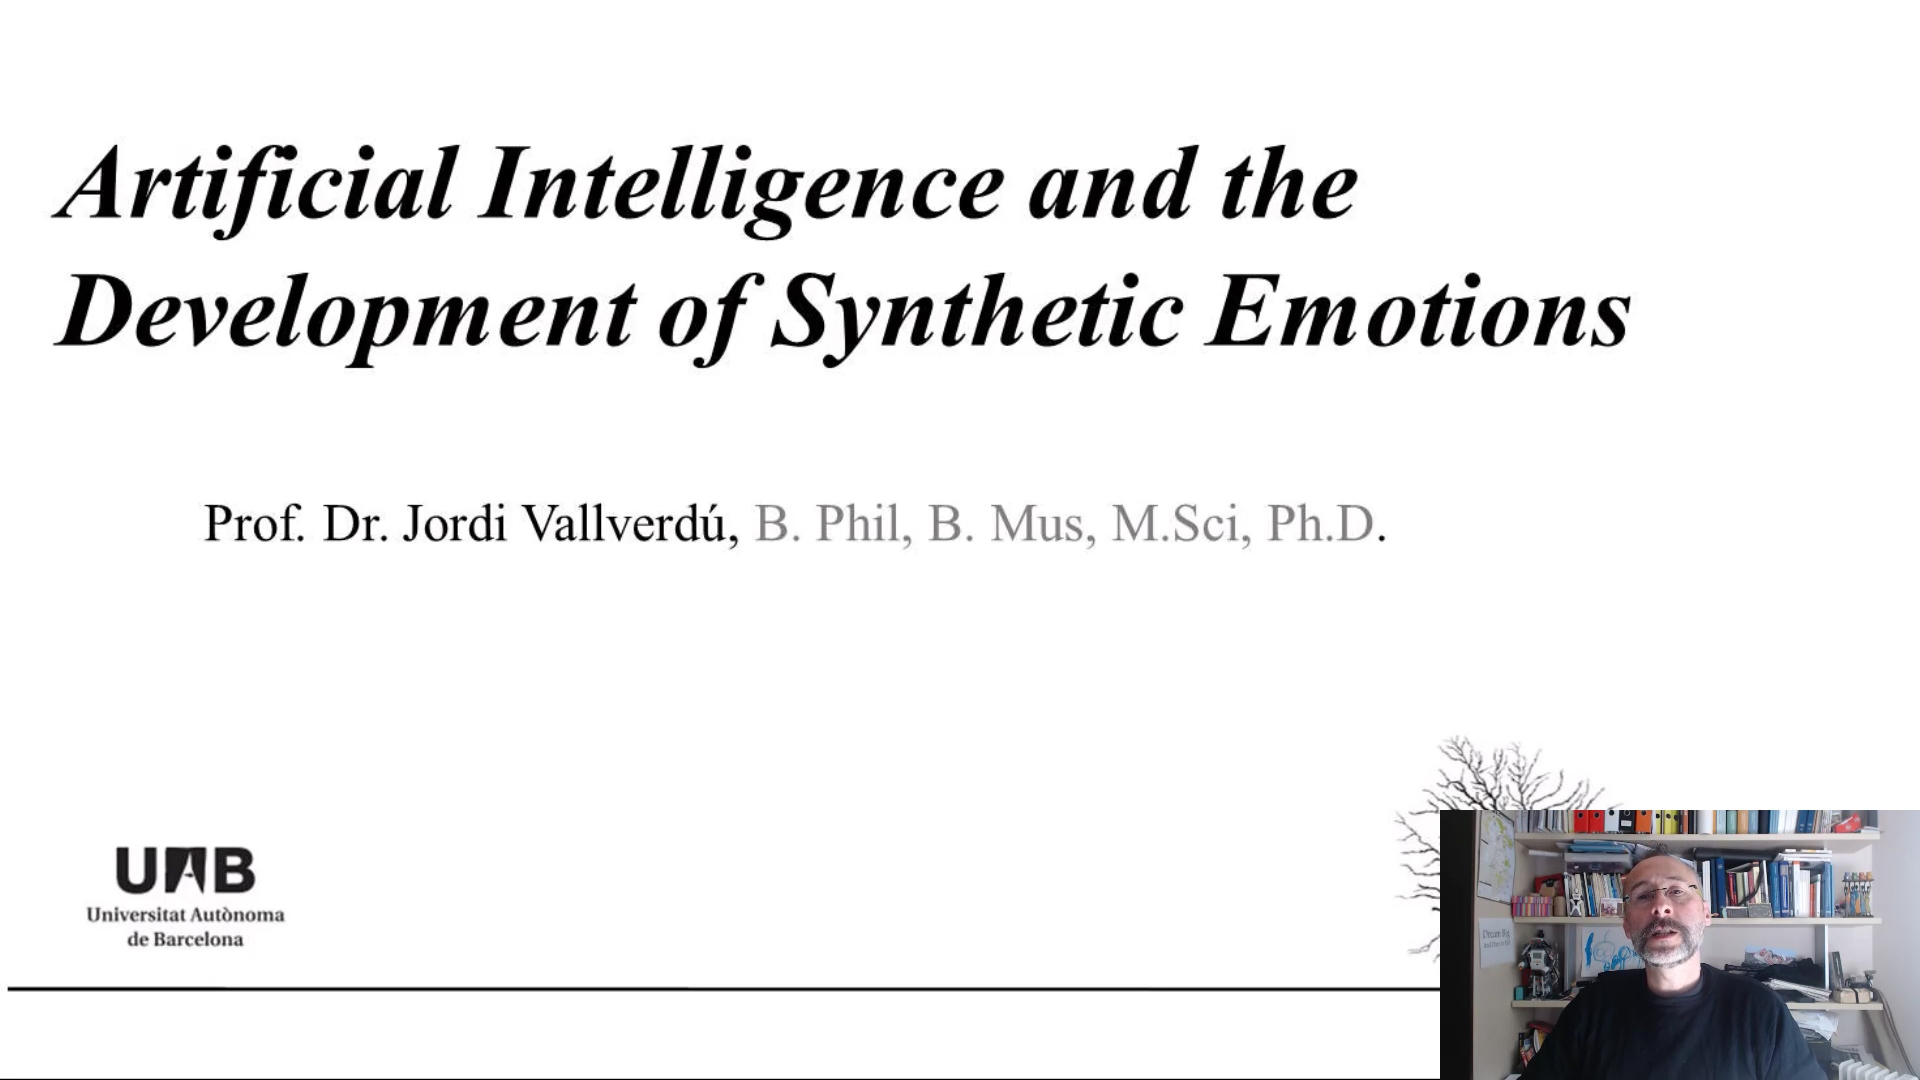 Advancements in Artificial Intelligence Applications and the Development of Synthetic Emotions